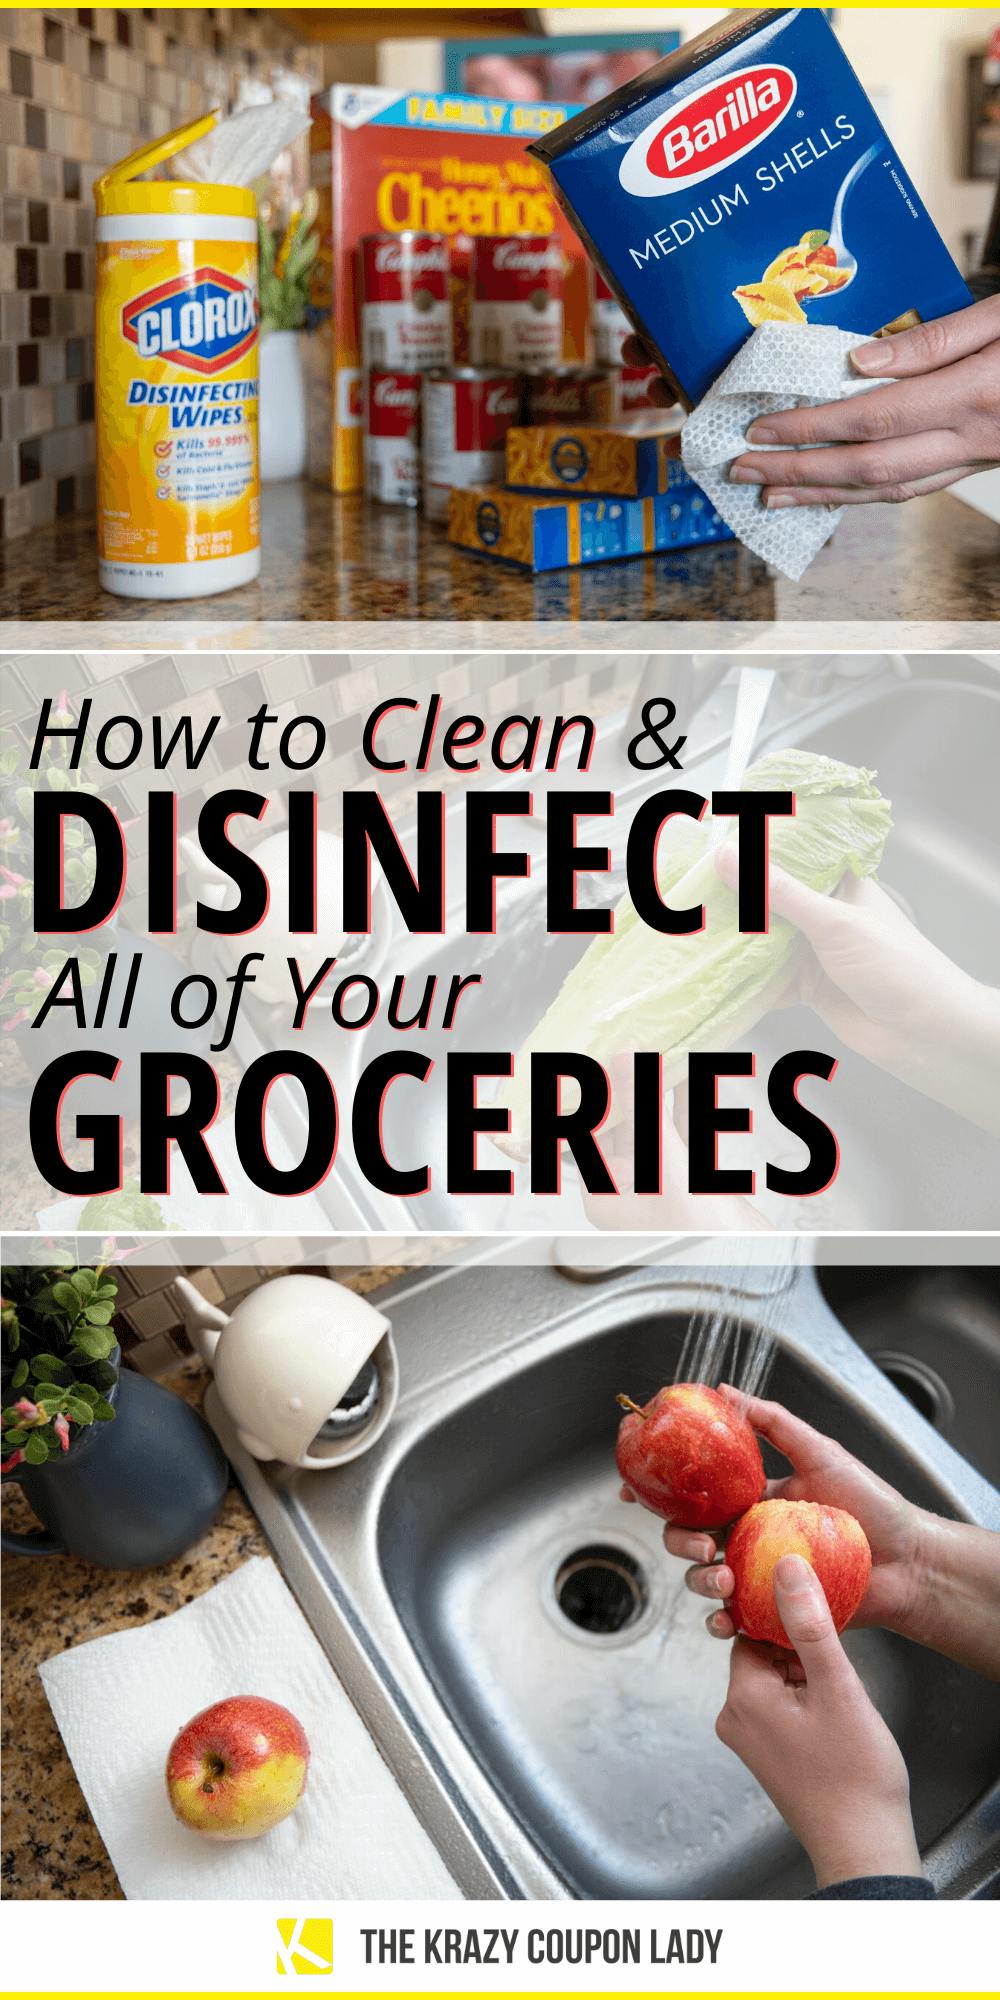 How to Clean Your Groceries During Coronavirus